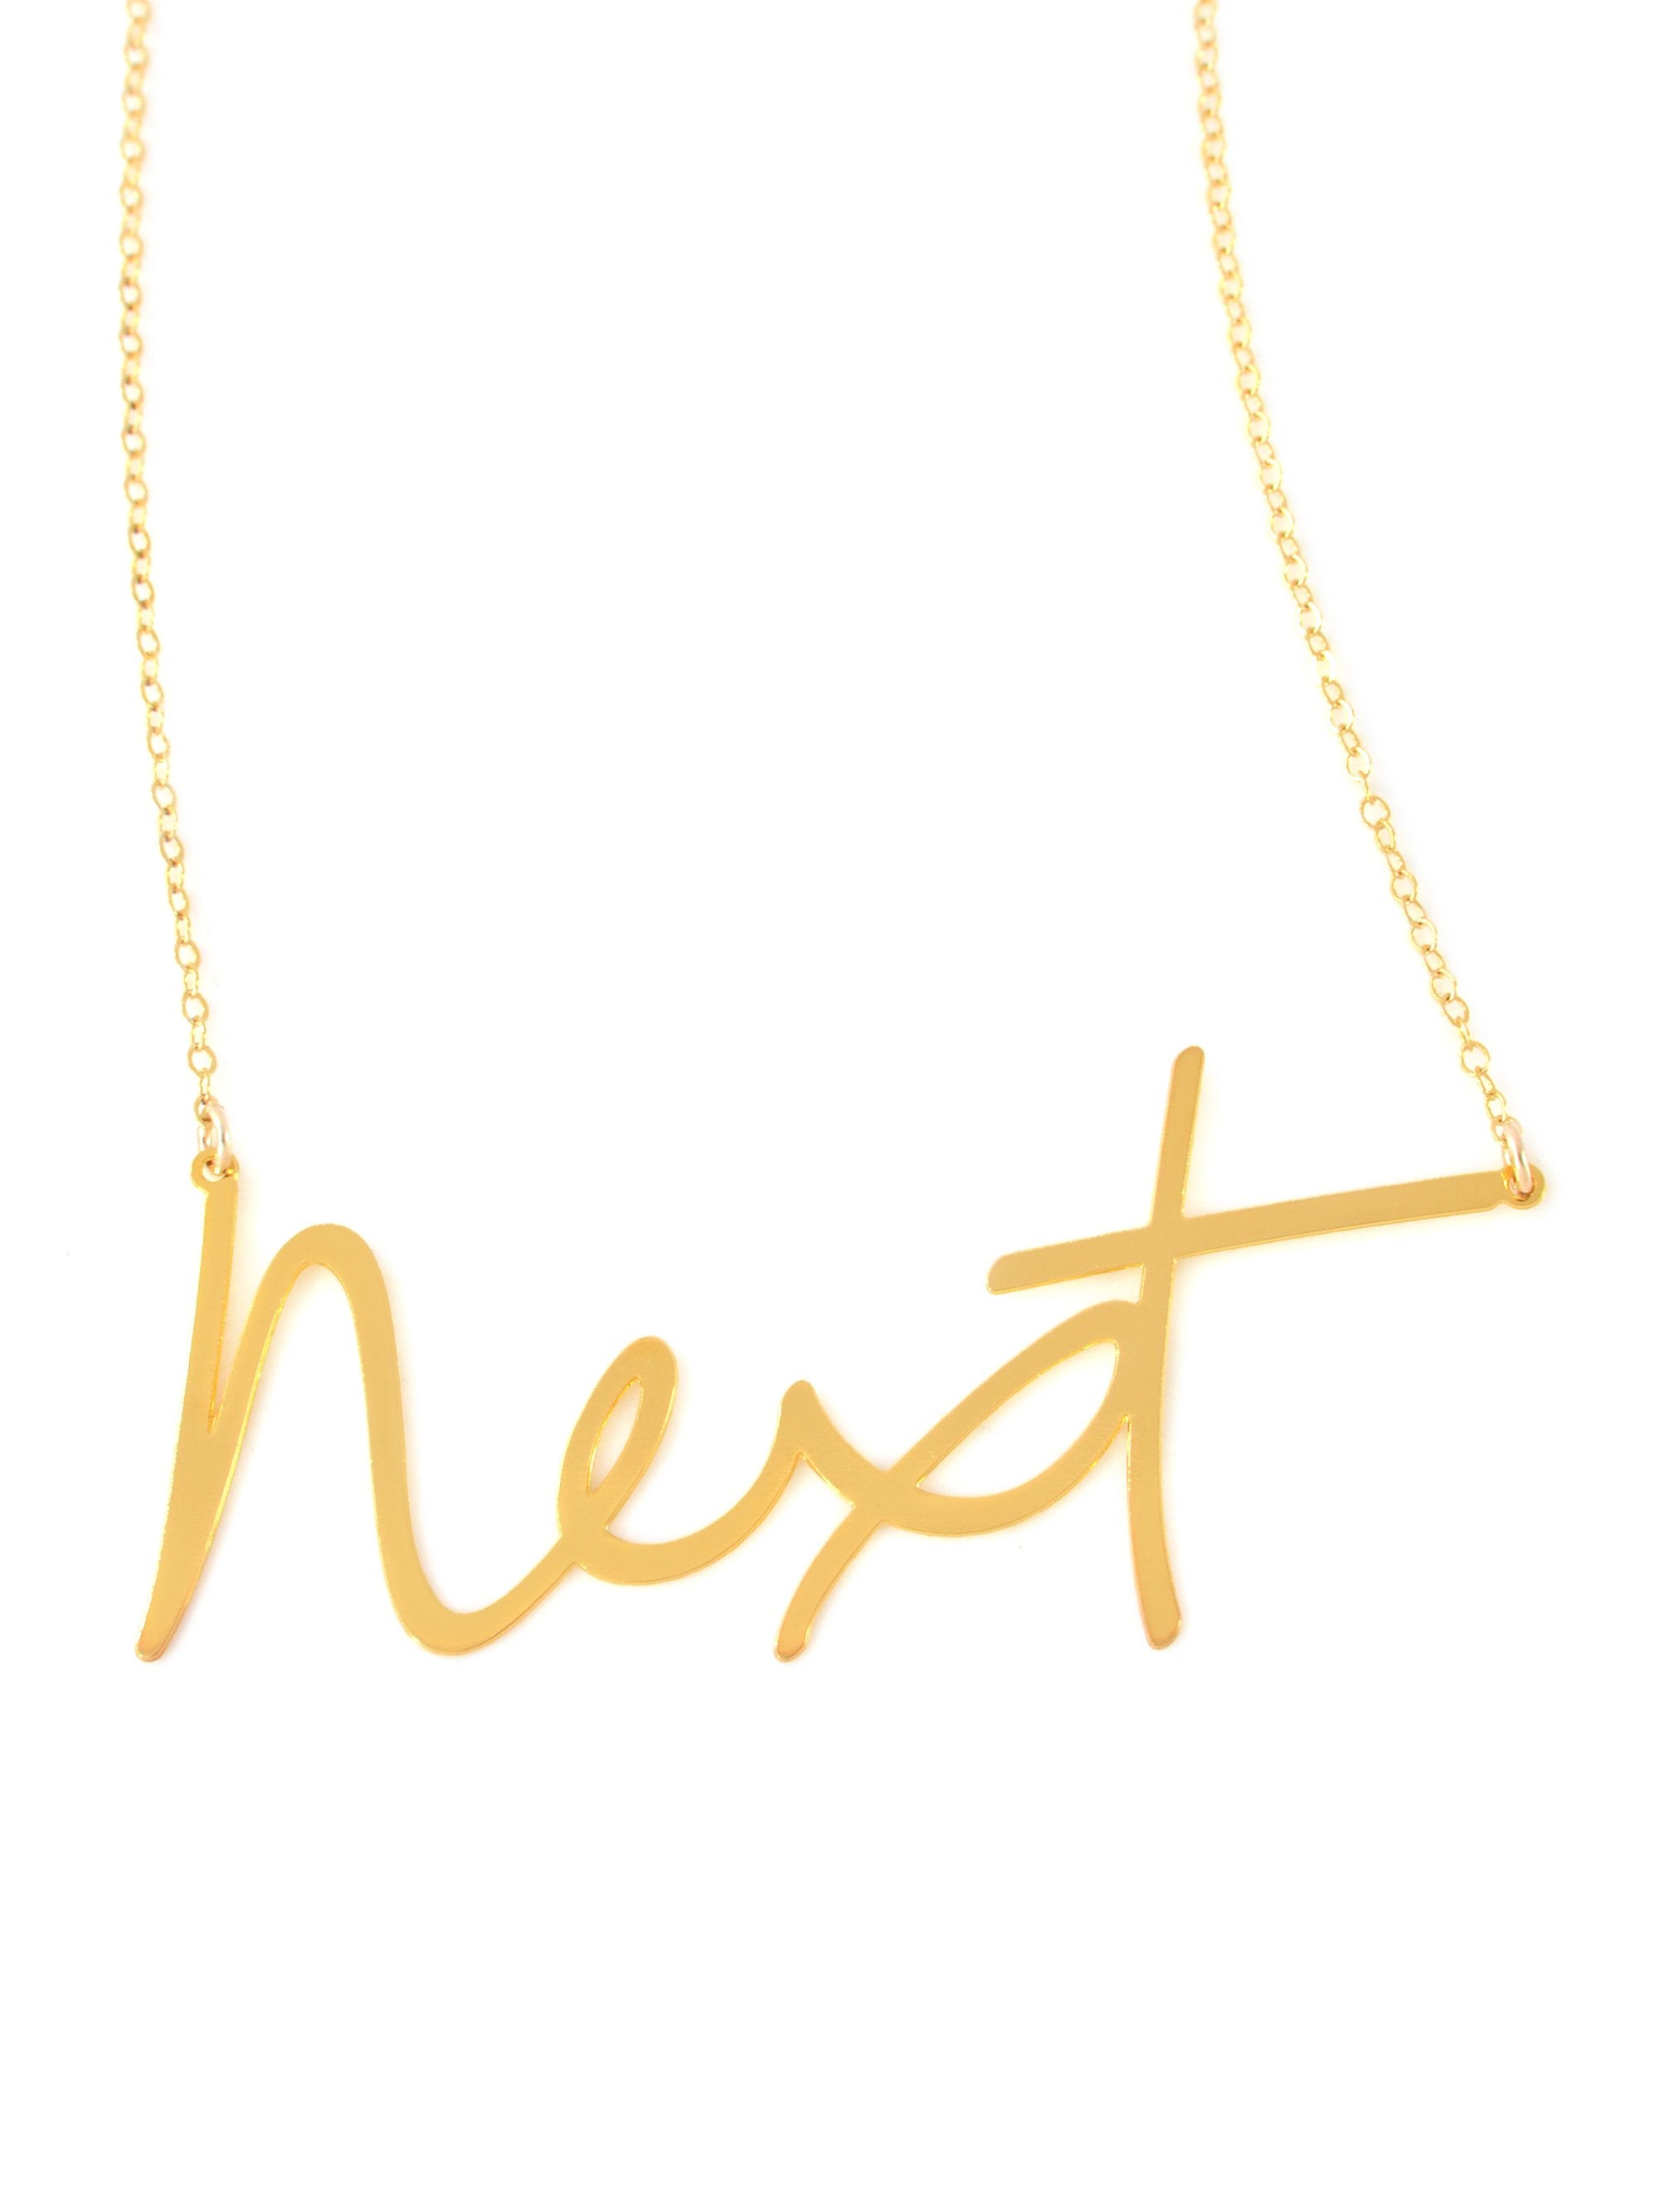 Next Necklace - High Quality, Affordable, Hand Written, Self Love, Mantra Word Necklace - Available in Gold and Silver - Small and Large Sizes - Made in USA - Brevity Jewelry